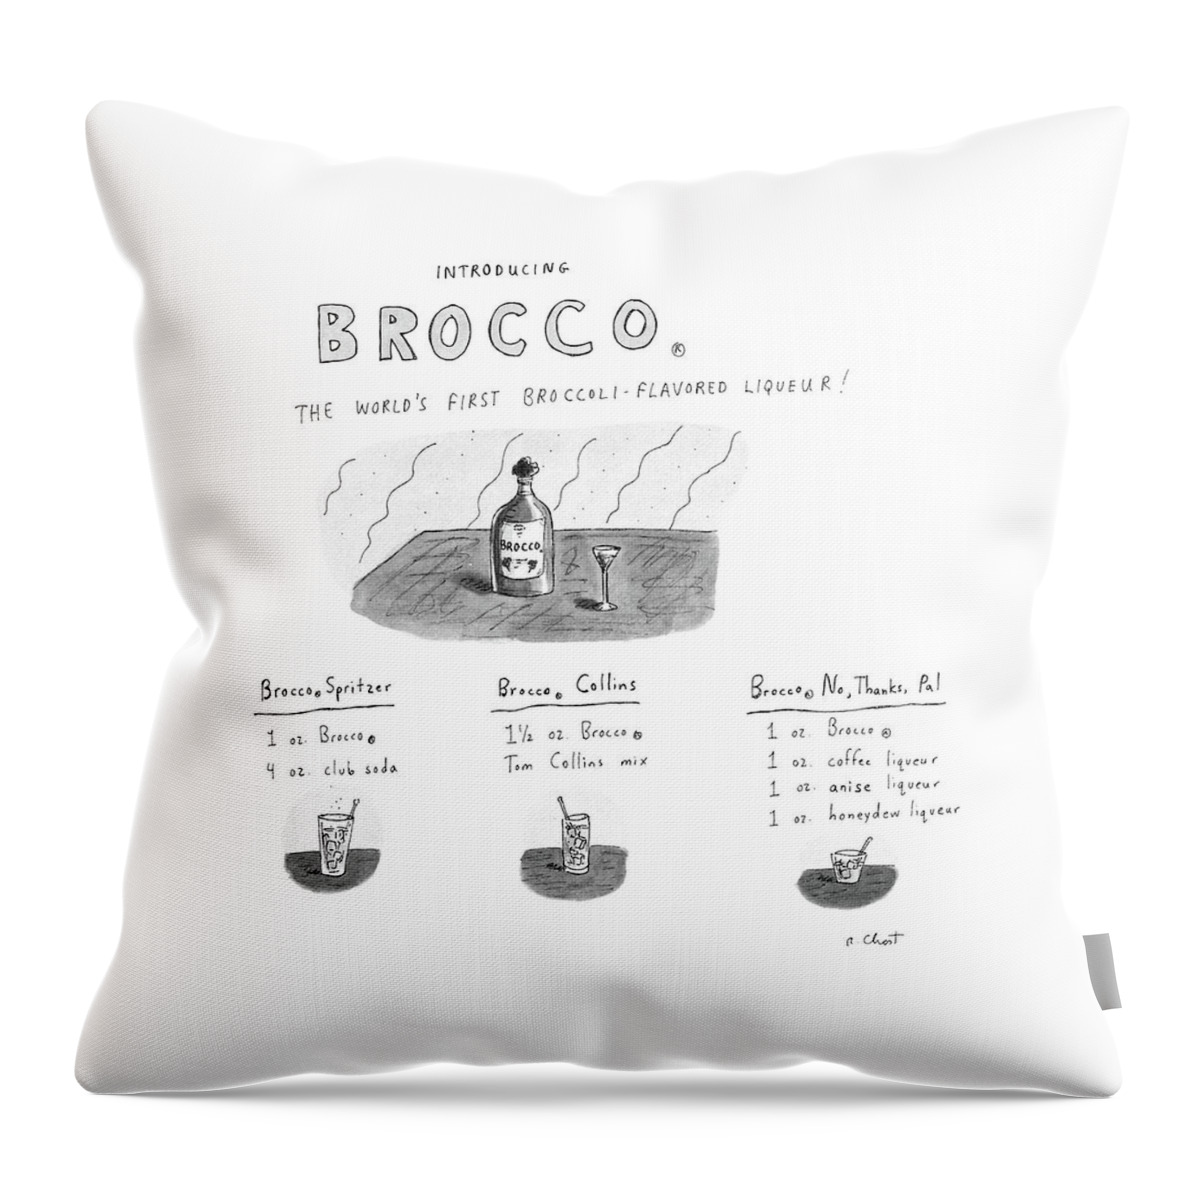 Introducing Brocco.
The World's First Throw Pillow